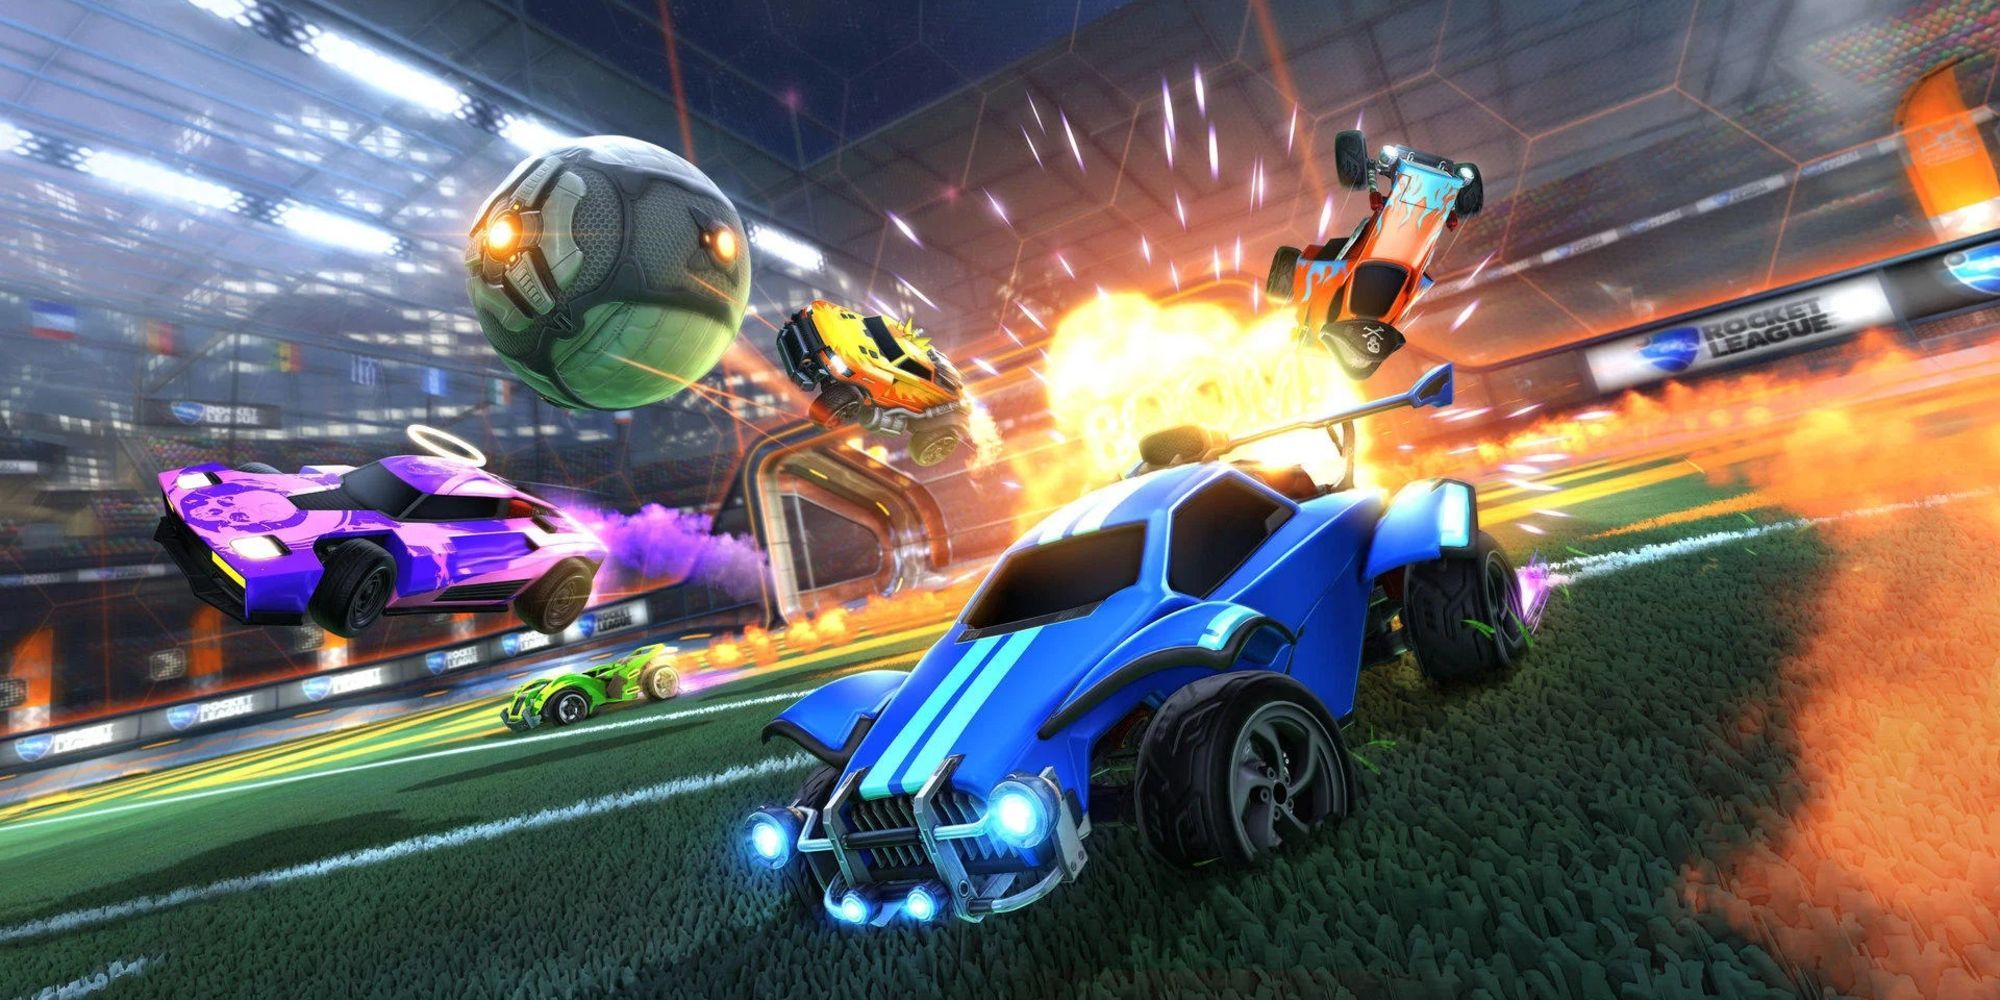 A blue and purple car chase after the ball while other cars explode in the background in Rocket League.